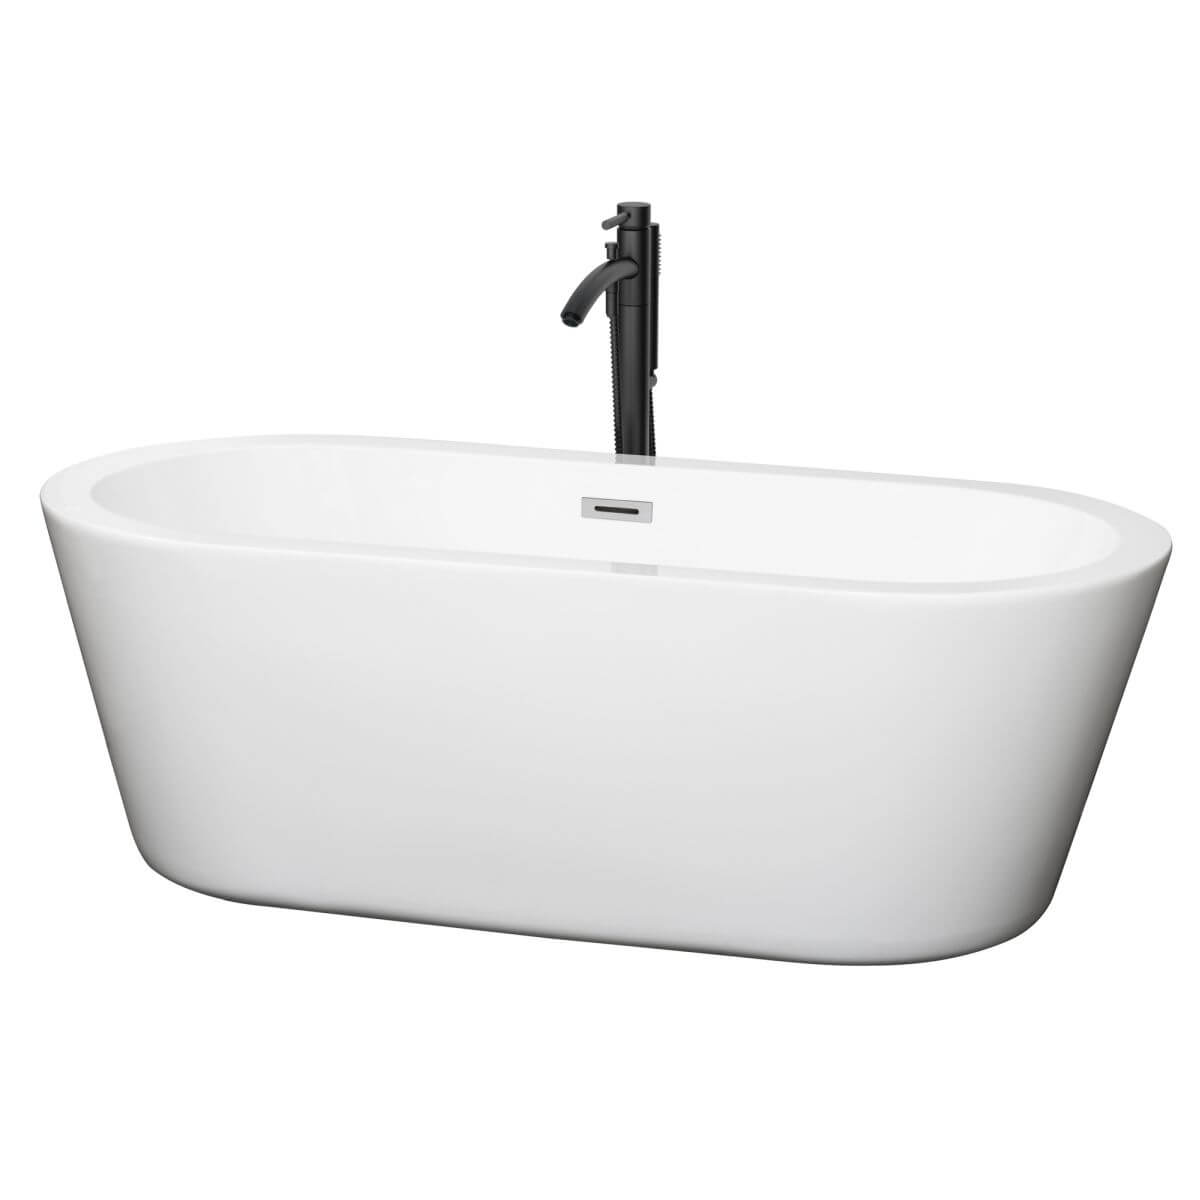 Wyndham Collection Mermaid 67 inch Freestanding Bathtub in White with Polished Chrome Trim and Floor Mounted Faucet in Matte Black - WCOBT100367PCATPBK